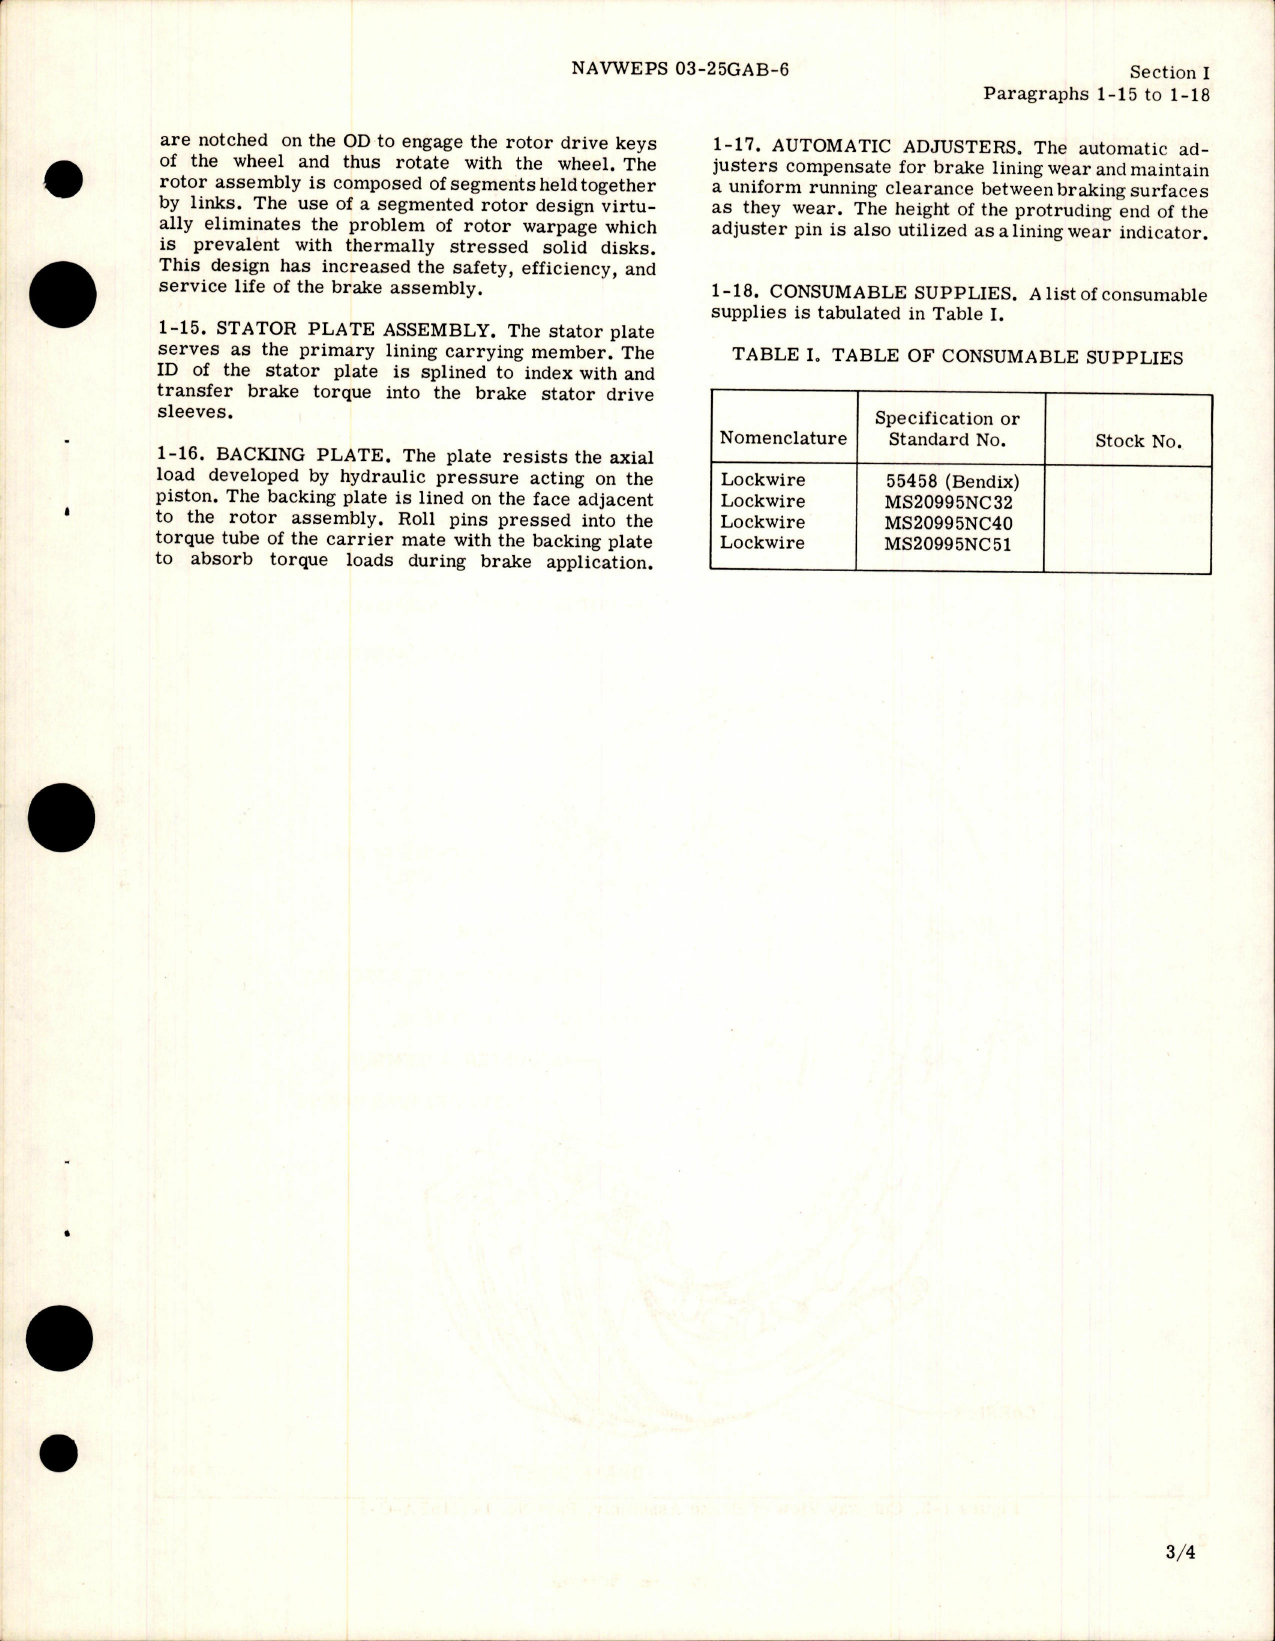 Sample page 7 from AirCorps Library document: Operation and Maintenance for Main Landing Gear Brake Assemblies